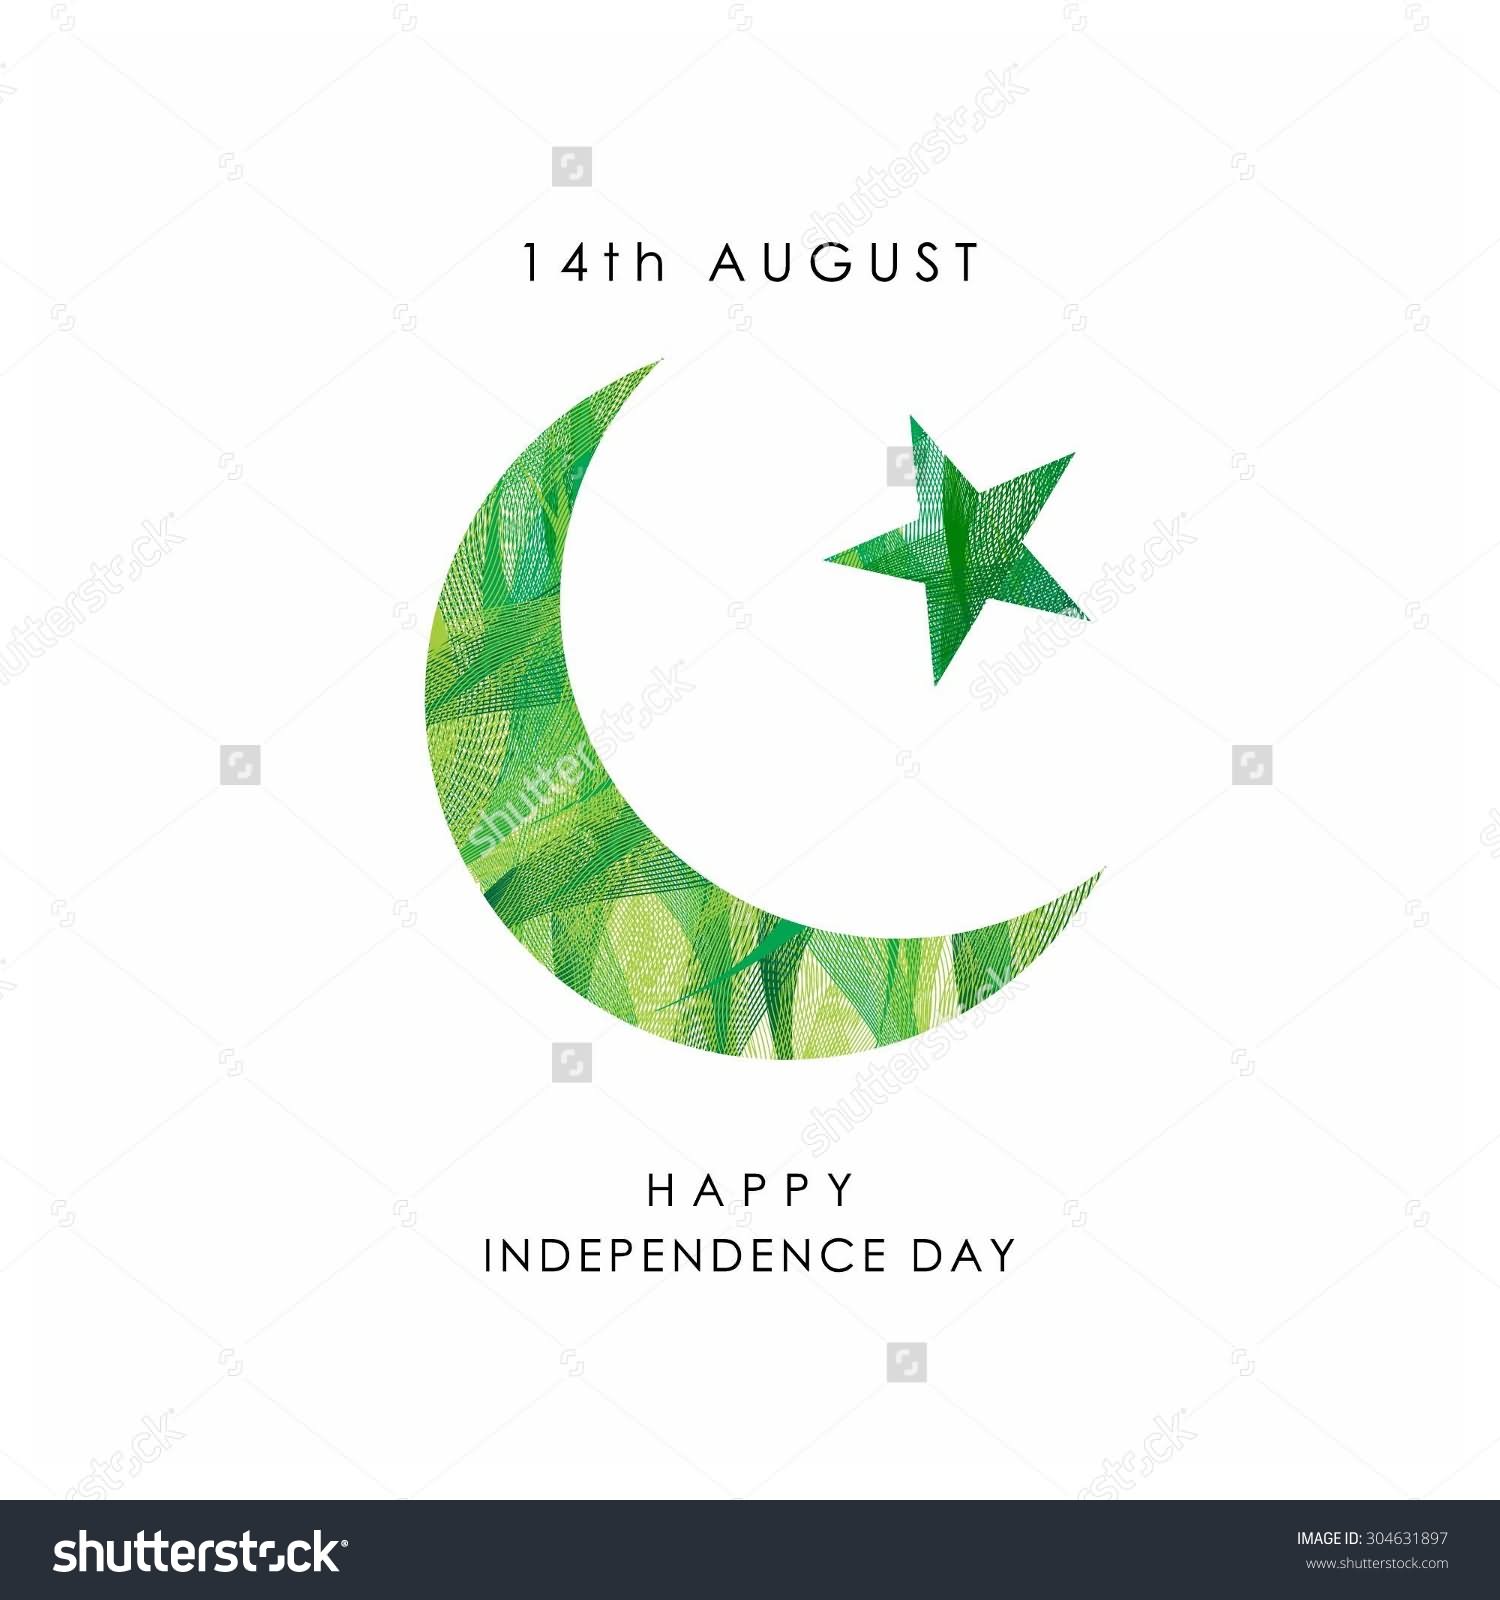 14th August Is Independence Day Of Pakistan 2016